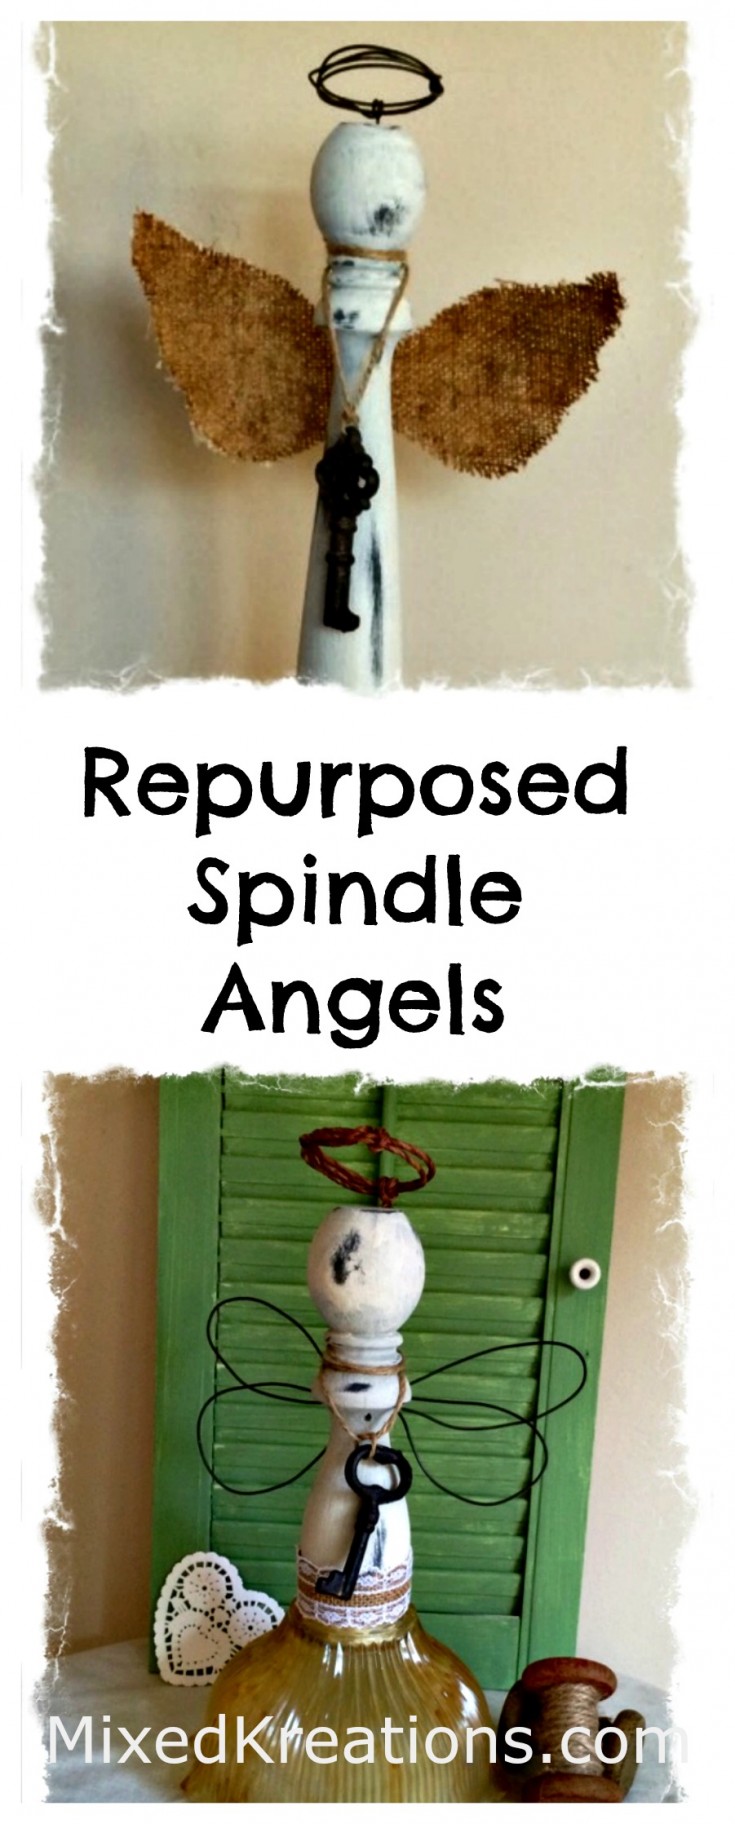 How to repurposed wood spindles / How to make spindle angels #repurposed #upcycled  #Spindles #Diy #SpindleAngels MixedKreations.com 